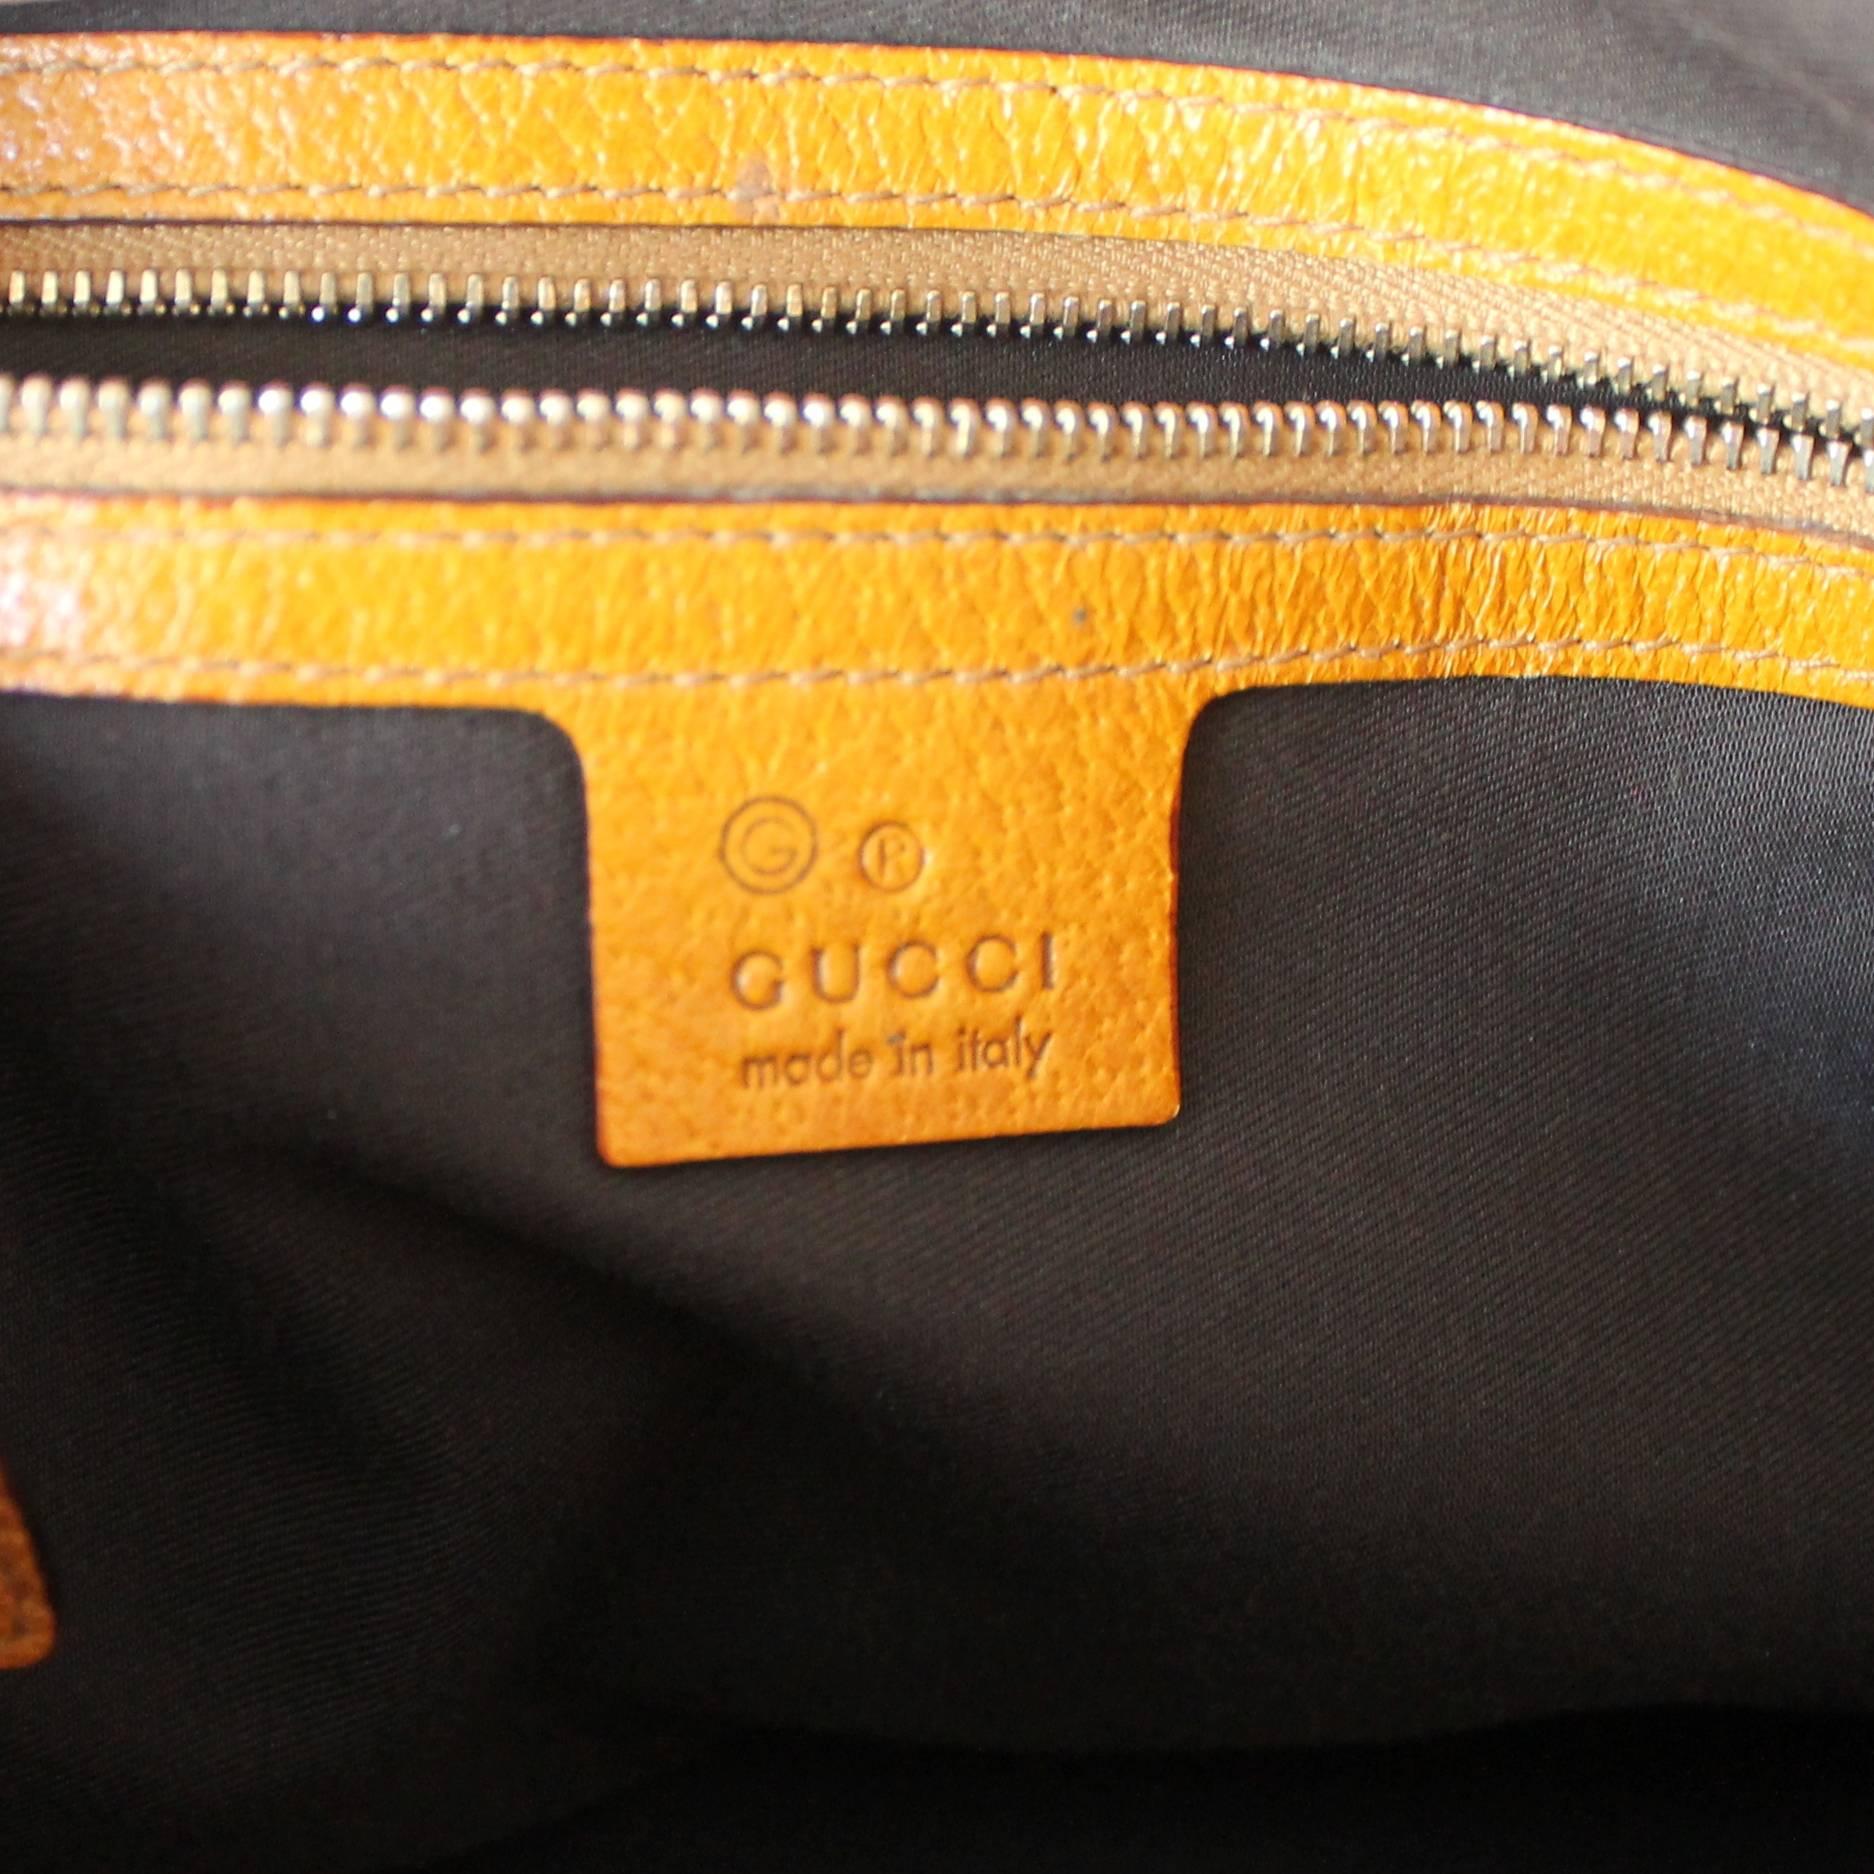 Gucci Multi Color Raised Needle Point Bag with Mustard Leather Trim 1